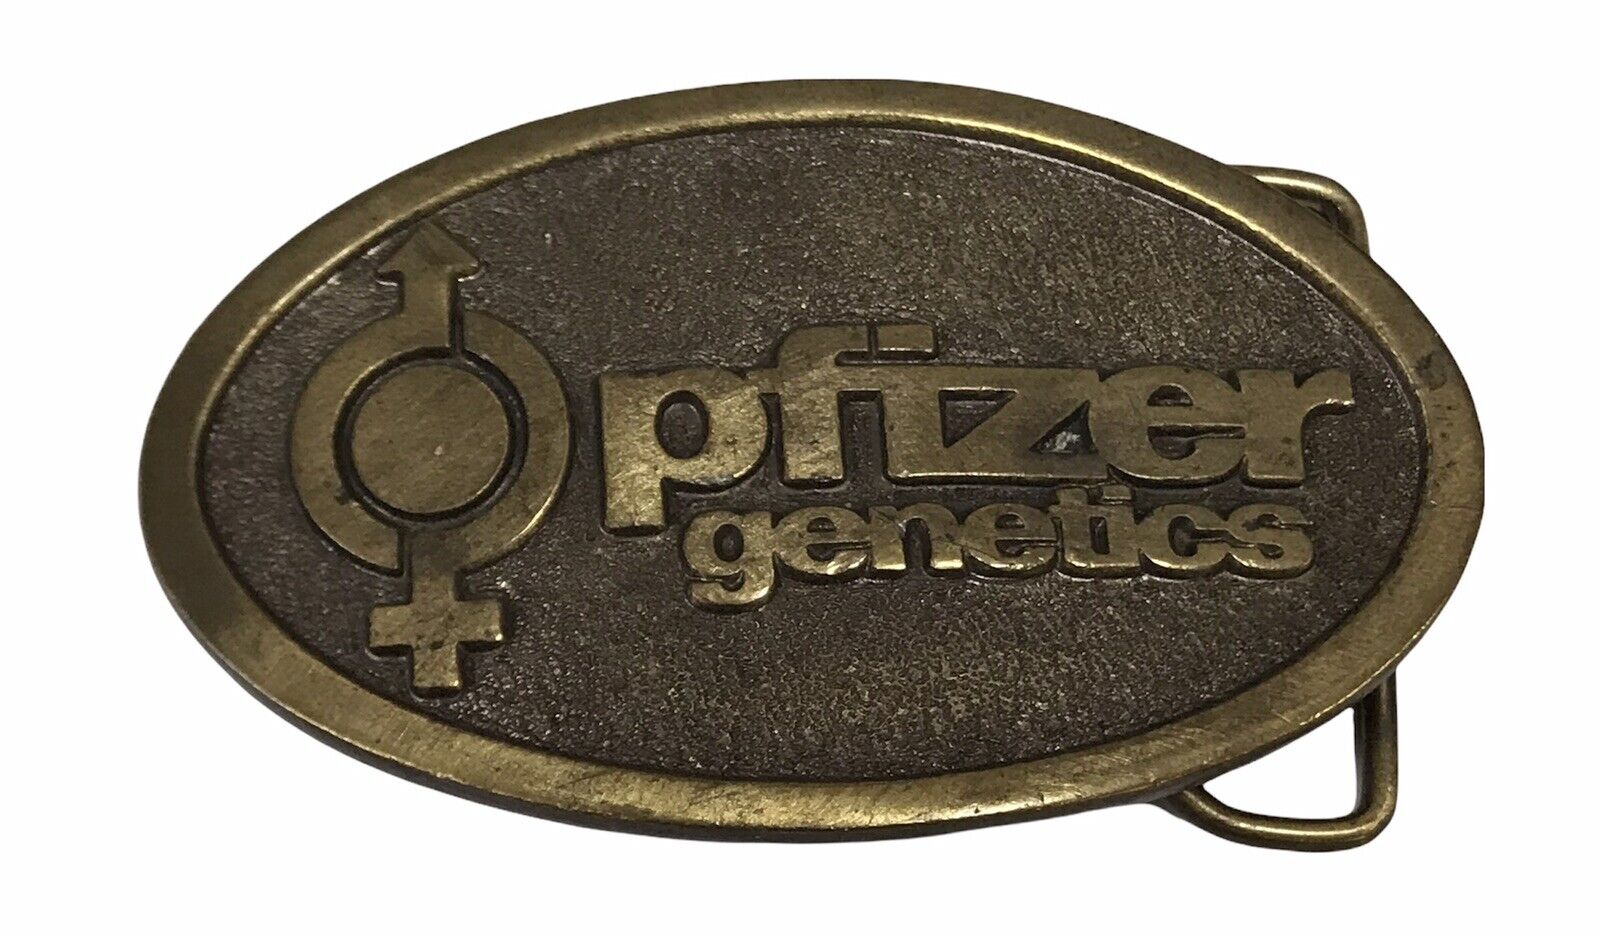 Pfizer Genetics Hybrid Seed Vintage Belt Buckle Rare 1970’s Or Early 80’s